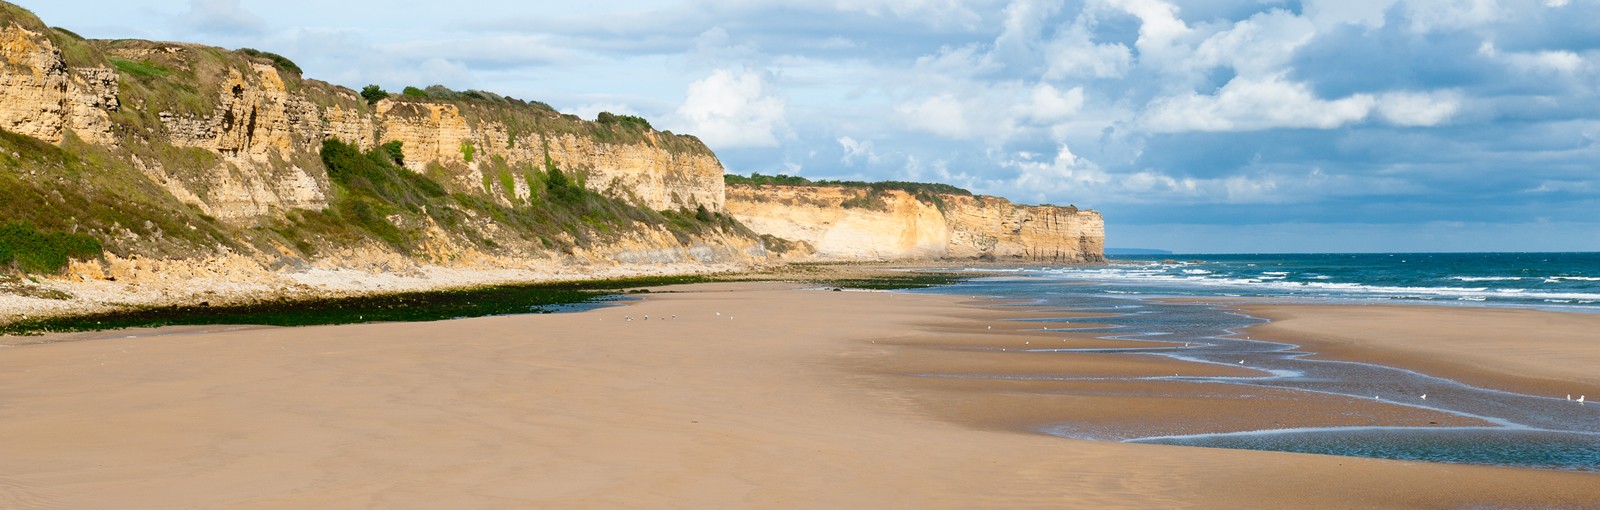 Tours Overnight to the Landing beaches of Normandy - Normandy - Multiday tours from Paris